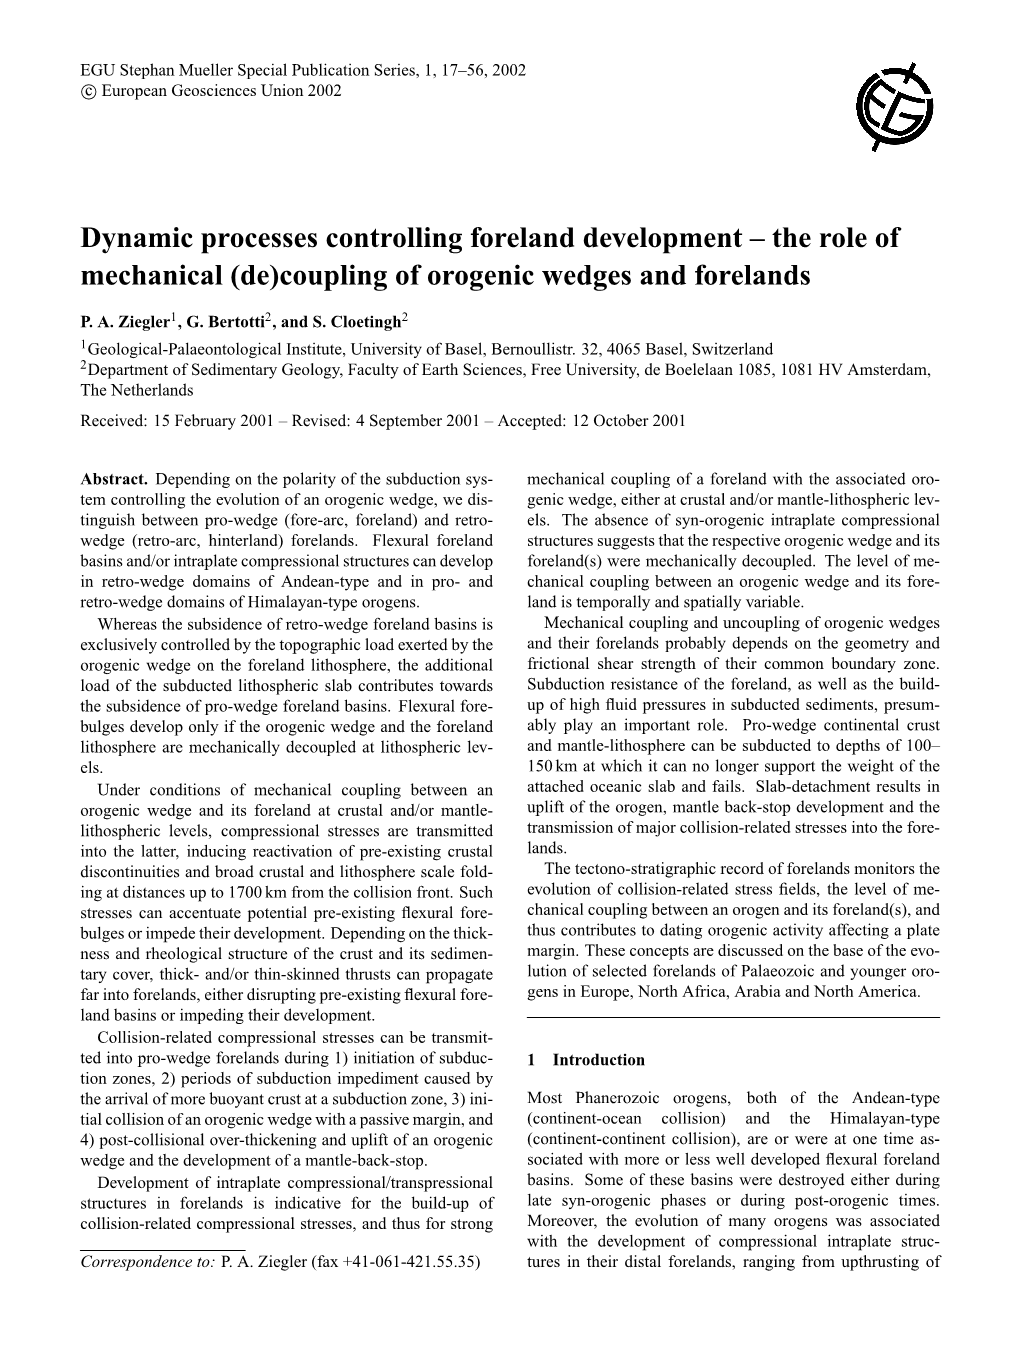 Dynamic Processes Controlling Foreland Development – the Role of Mechanical (De)Coupling of Orogenic Wedges and Forelands